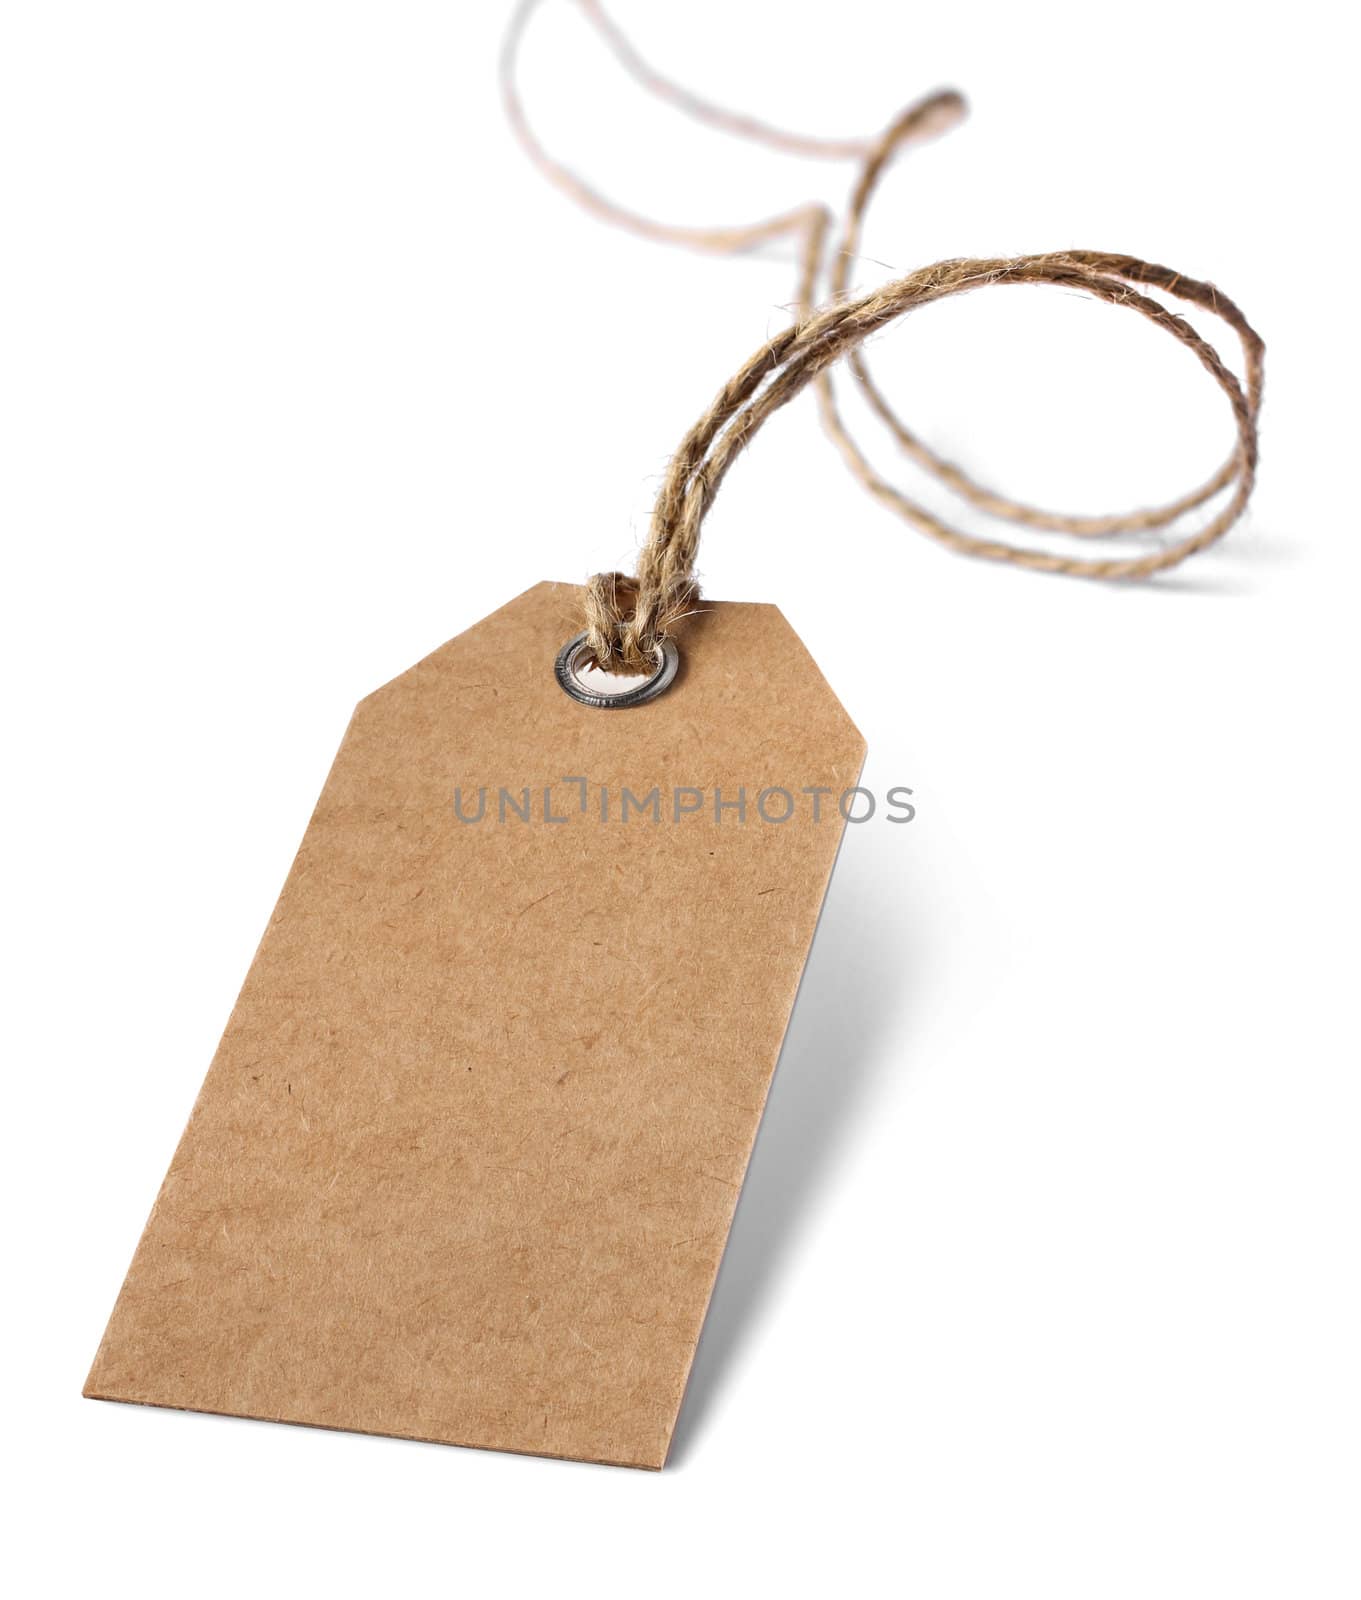 Blank price or address tag with natural ribbon twine, isolated on white